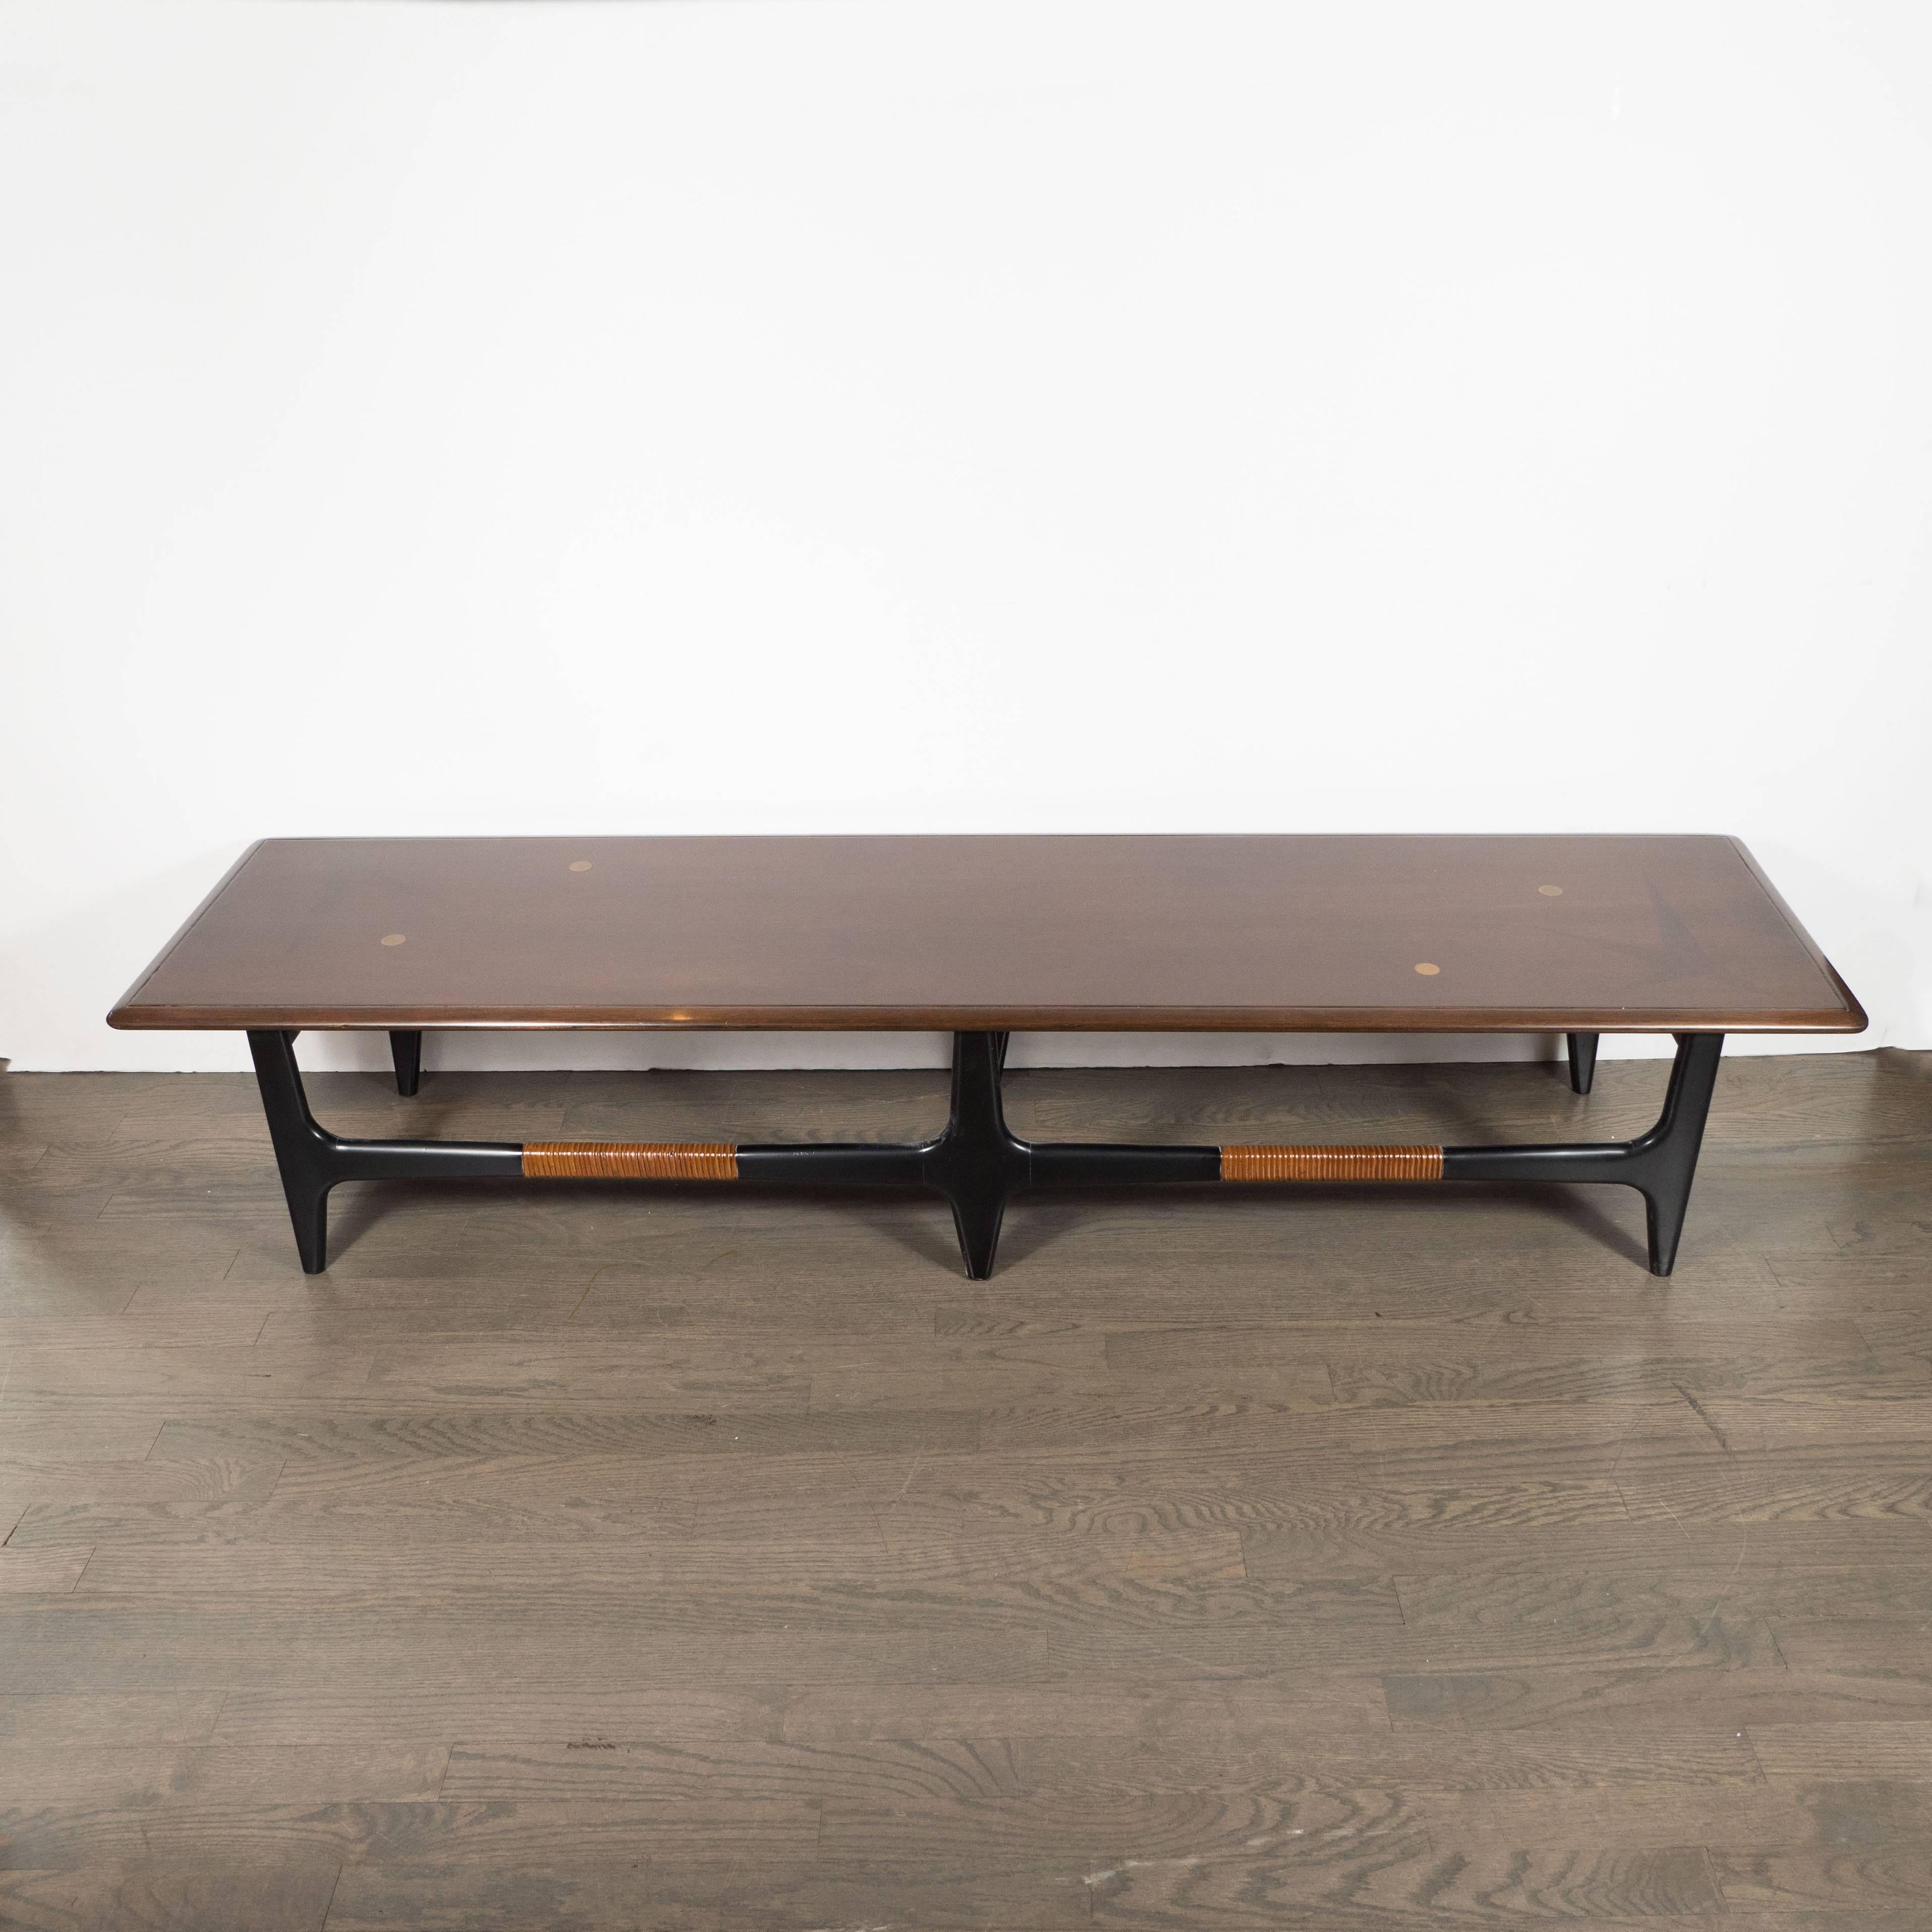 This exceptional Mid-Century Modern cocktail table was realized in the United States, circa 1960. It features three connected rattan wrapped legs that taper at the bottom, whittled by hand, in ebonized walnut. The rectangular top, crafted in hand